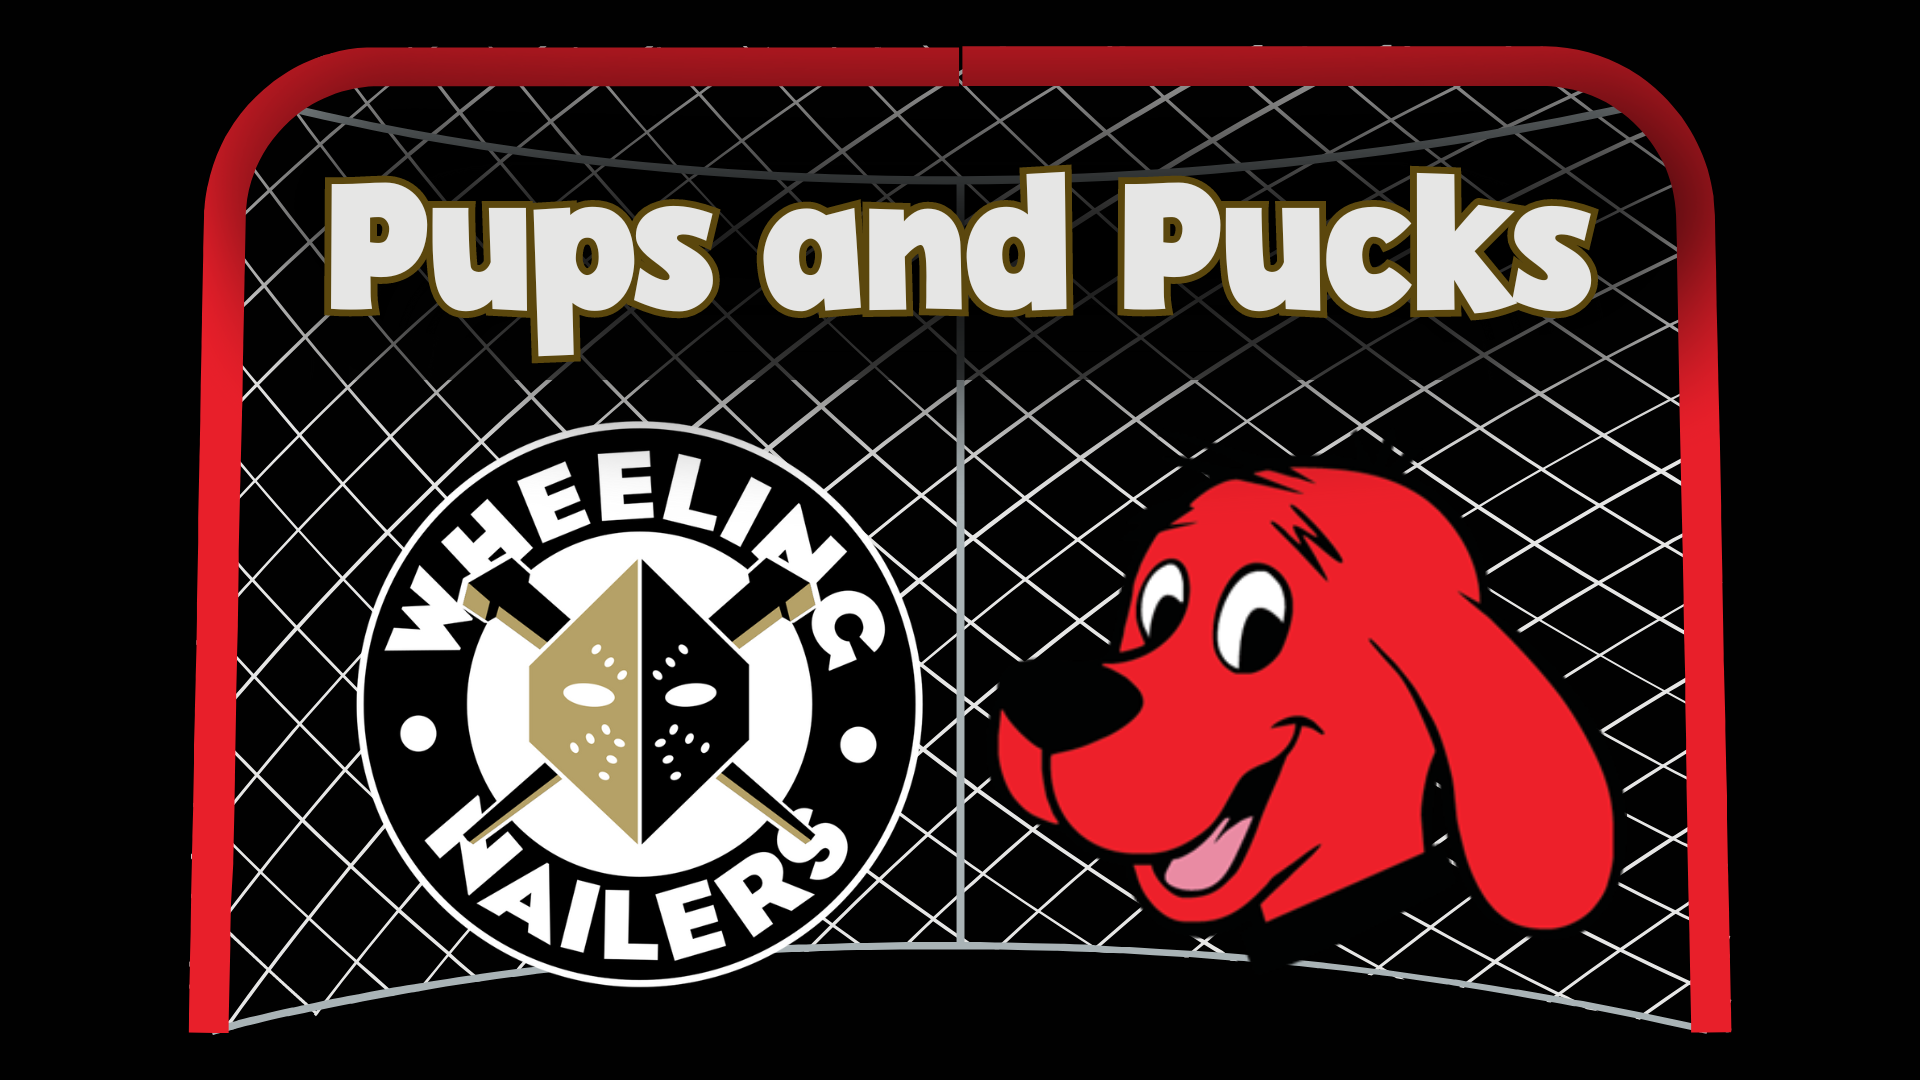 WVPB To Join The Wheeling Nailers For Pups And Pucks Night